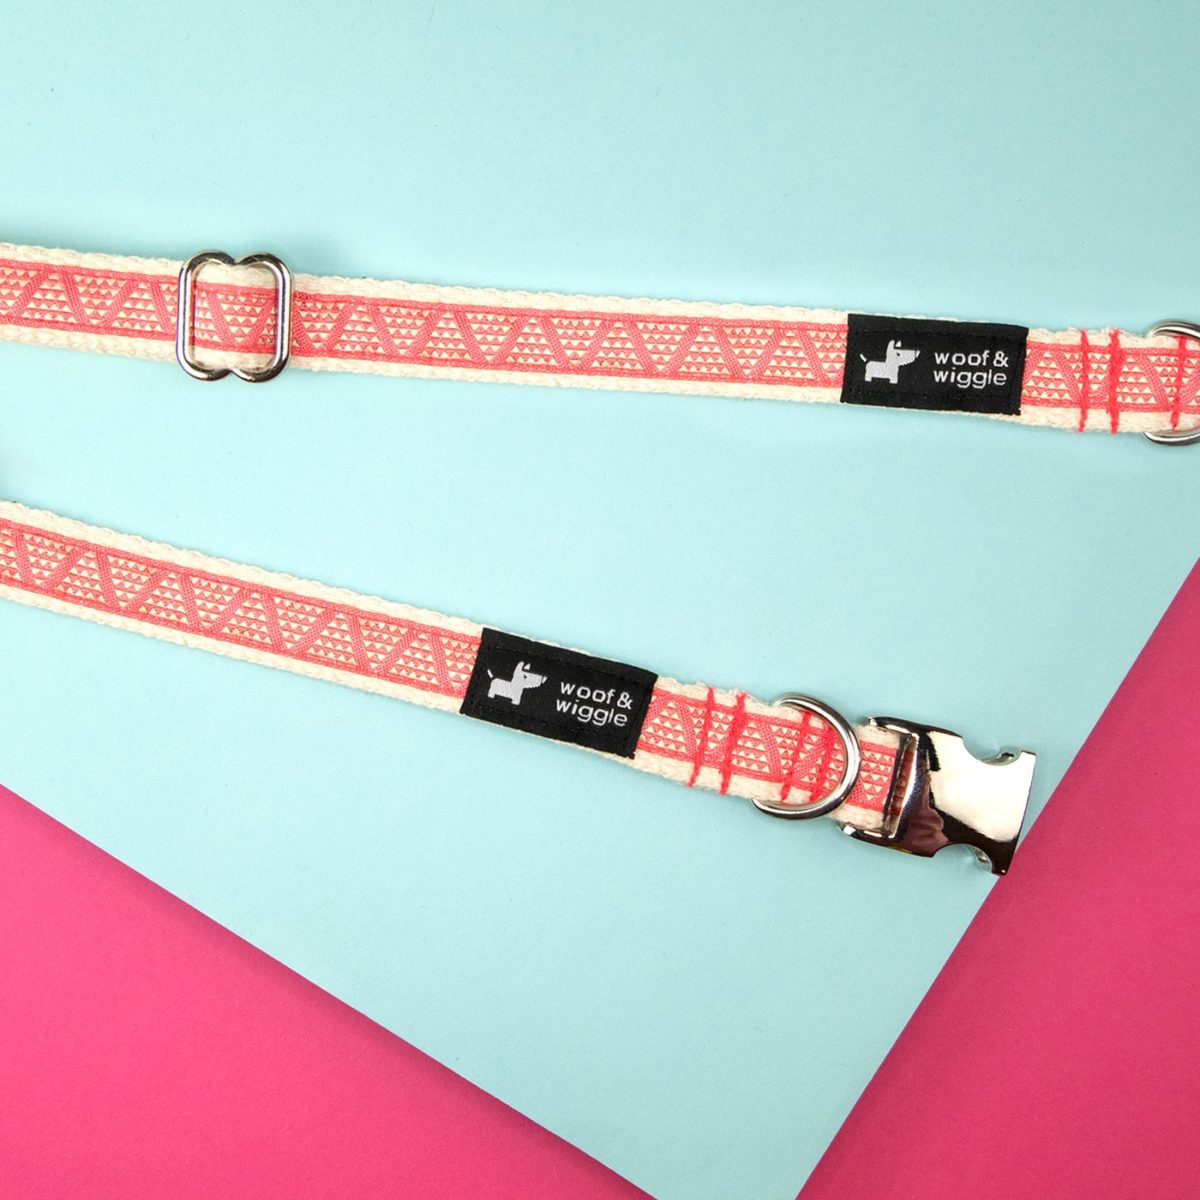 Dog collar with a red triangle pattern